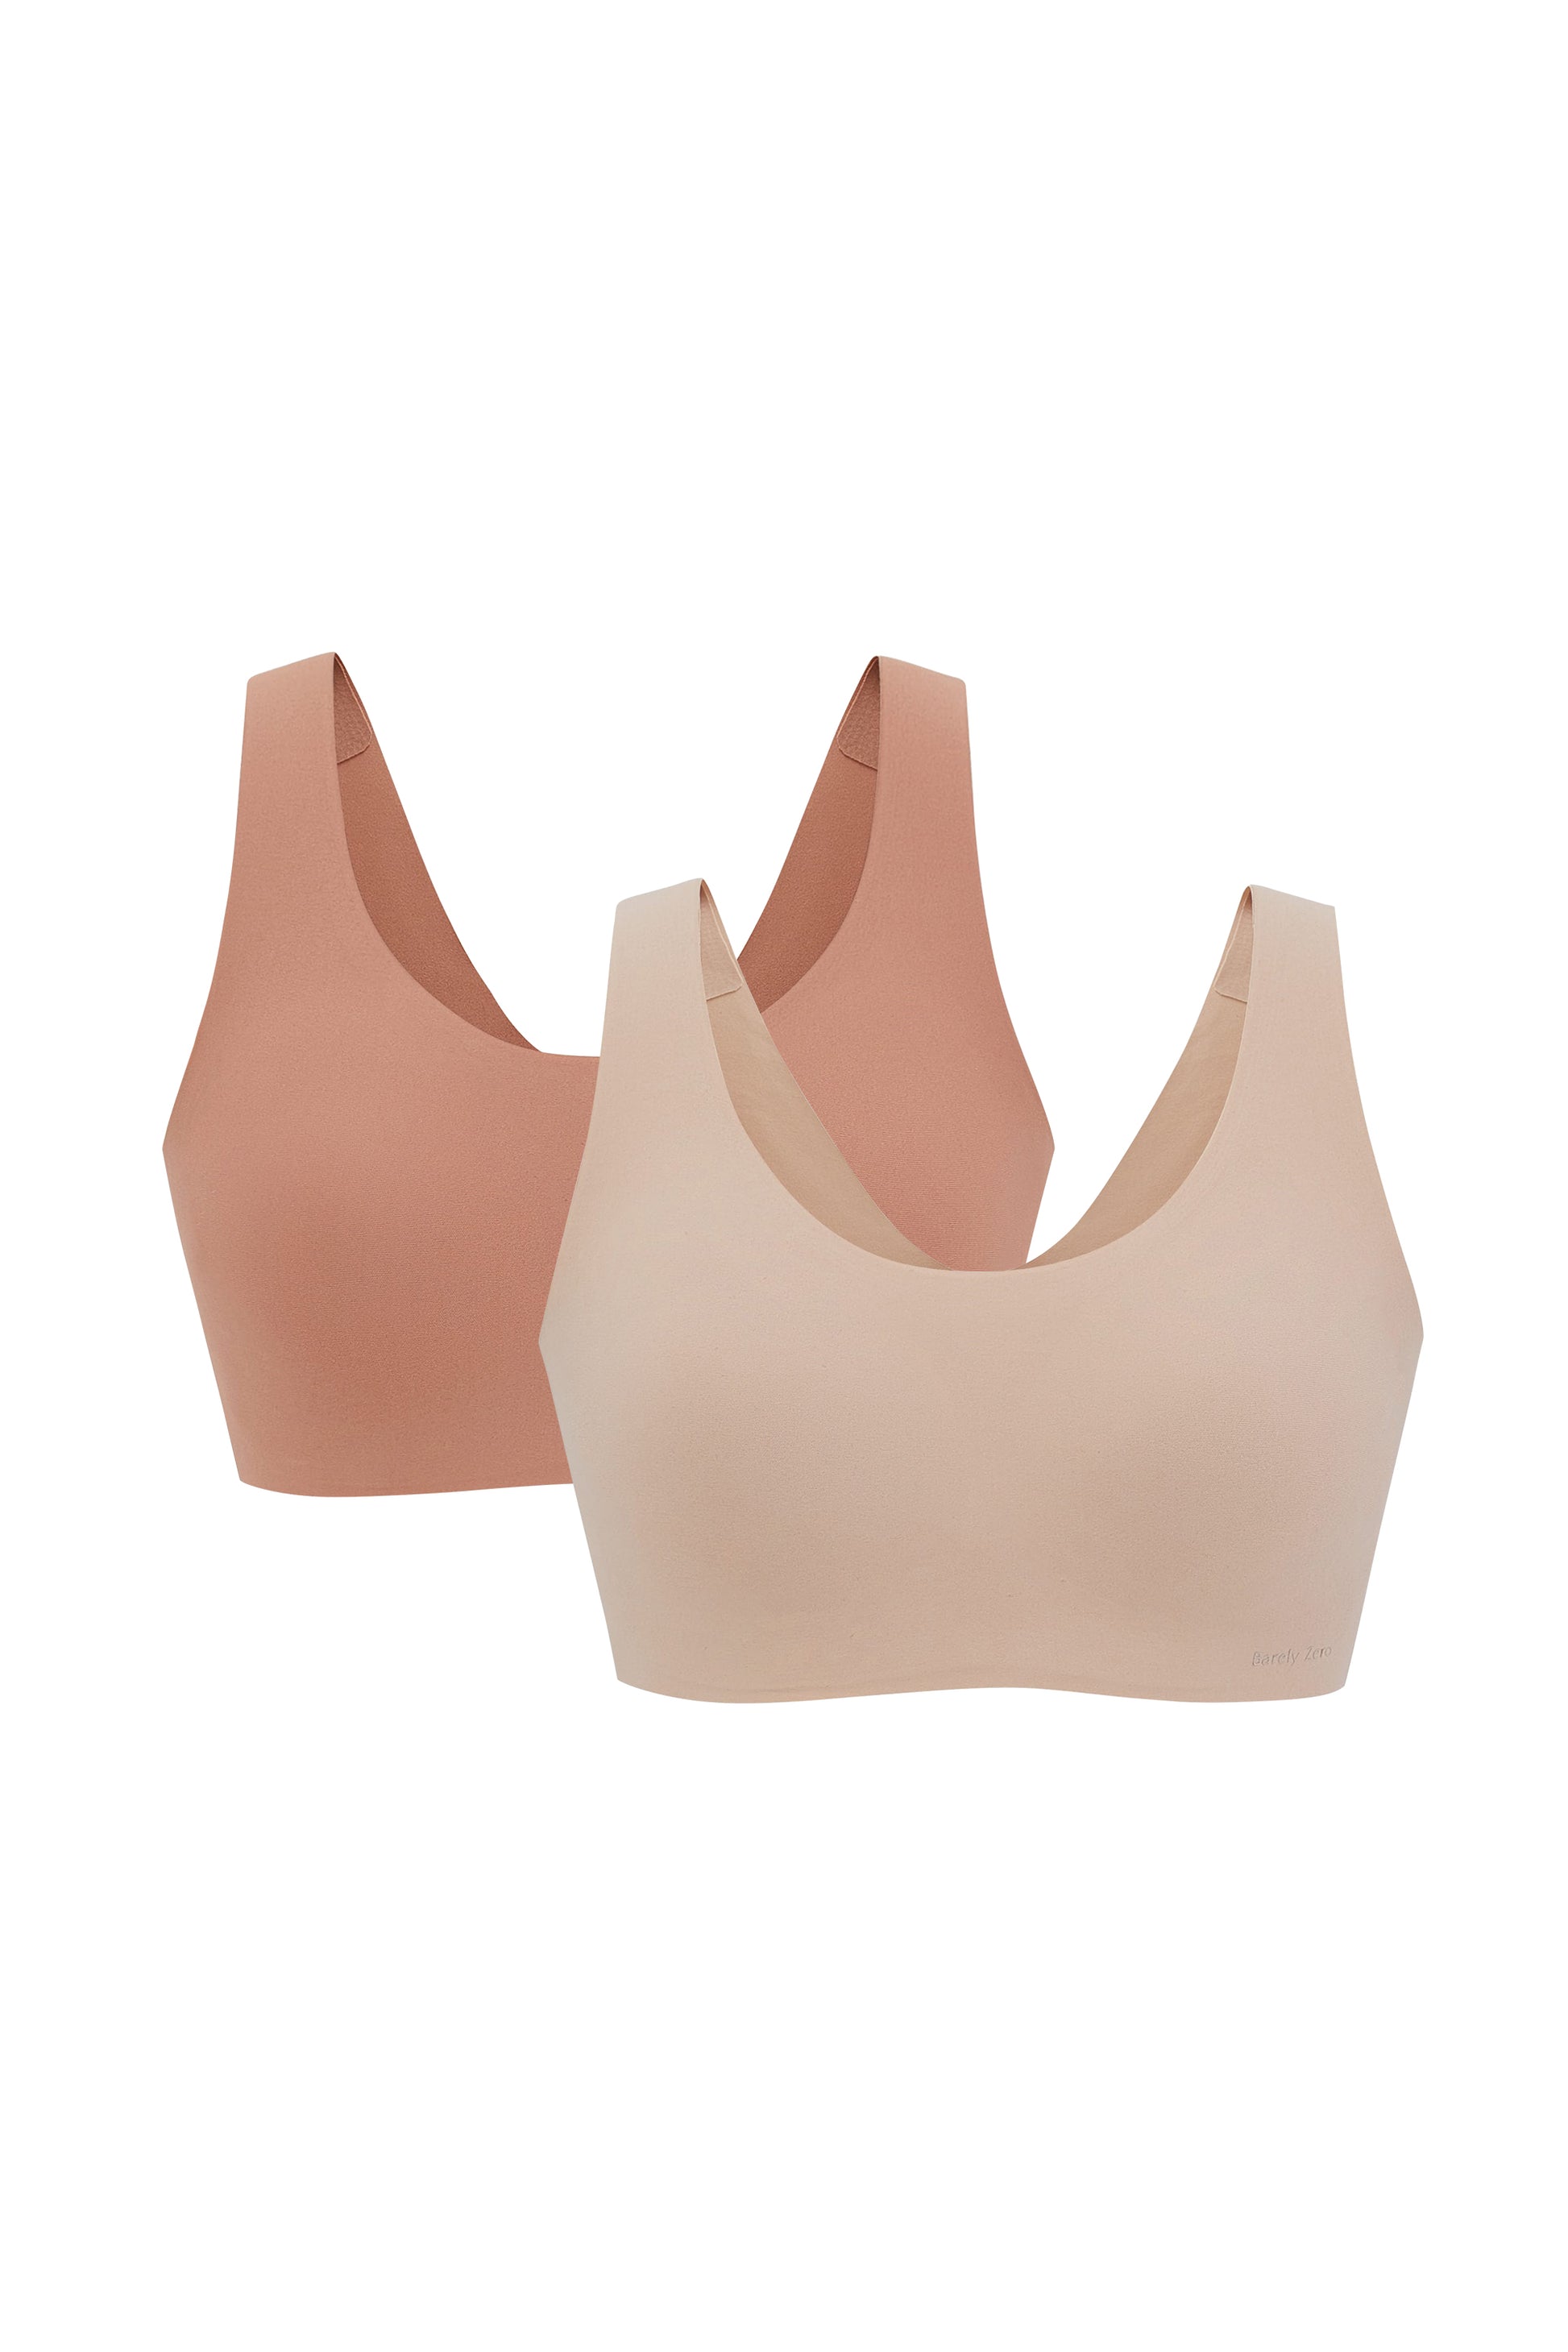 Two Barely Zero Classic Bra Bundles in neutral shades, one in a darker tan and the other in a lighter beige, both featuring CloudFit technology, displayed against a white background.